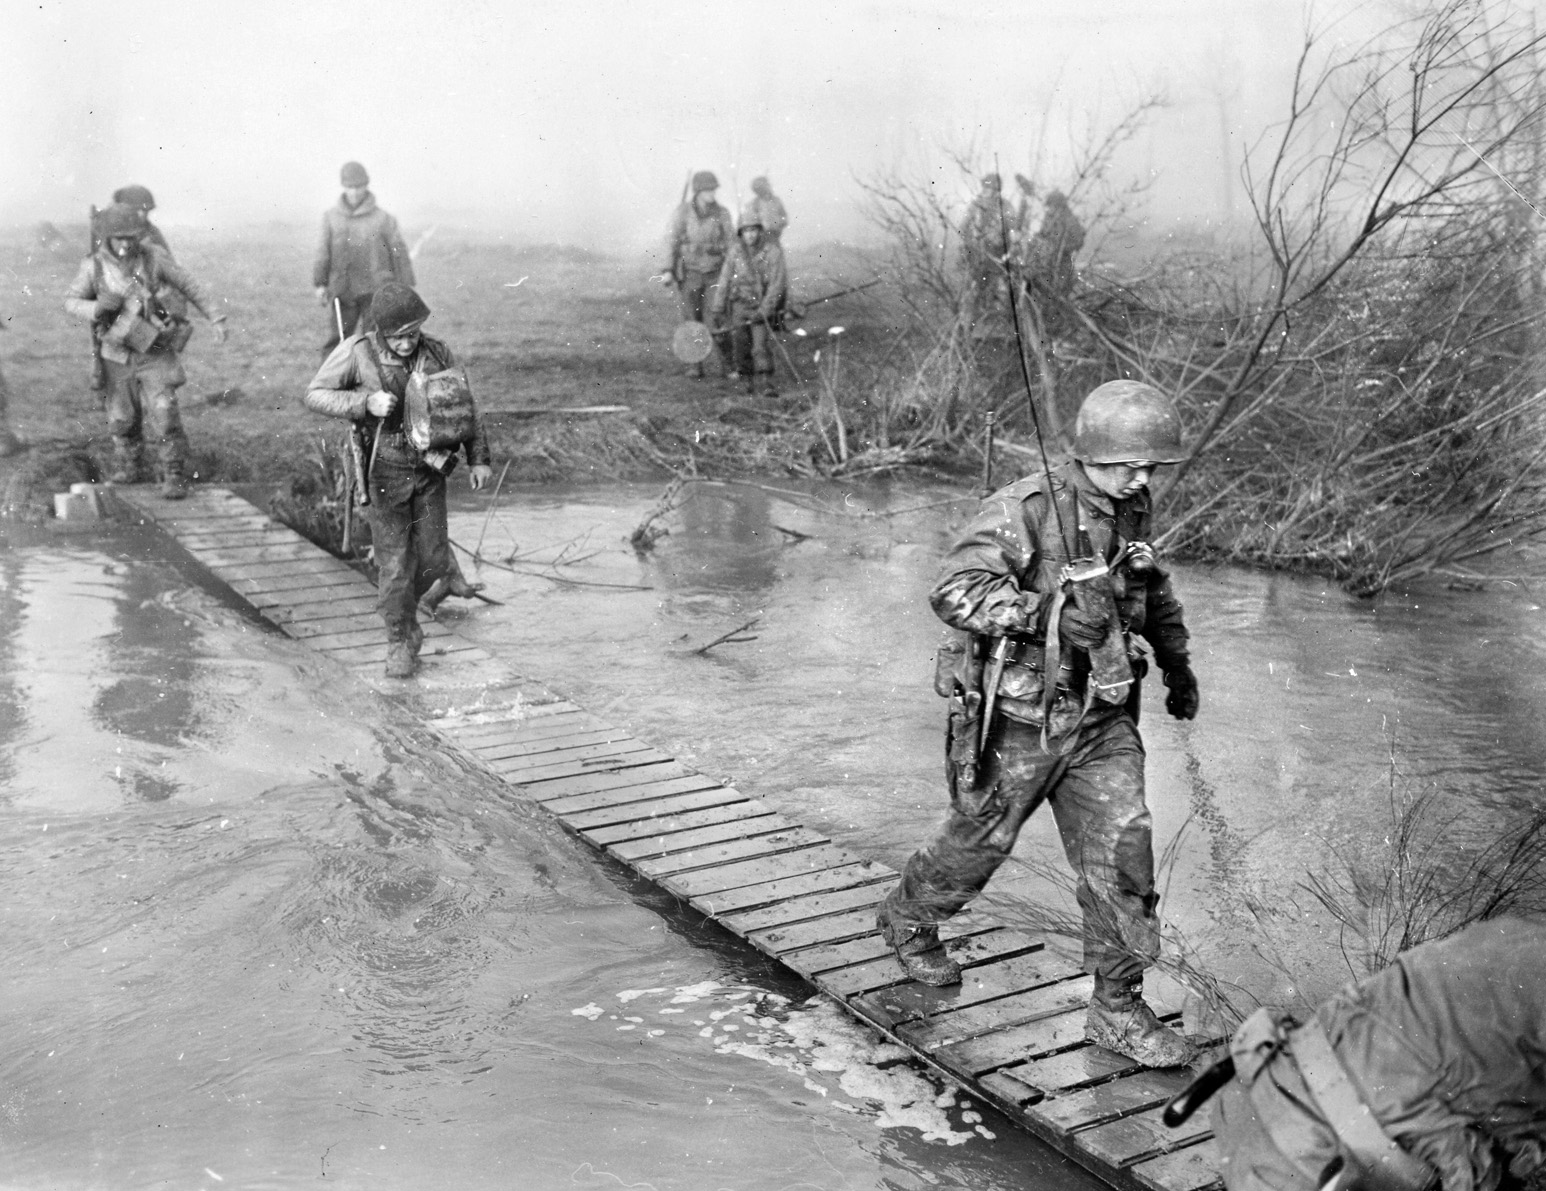 With the Germans opening floodgates and inundating the countryside, troops of the 120th Regiment, 30th Infantry Division (“Old Hickory”), cross a footbridge over the swollen Roer River, February 23, 1945.